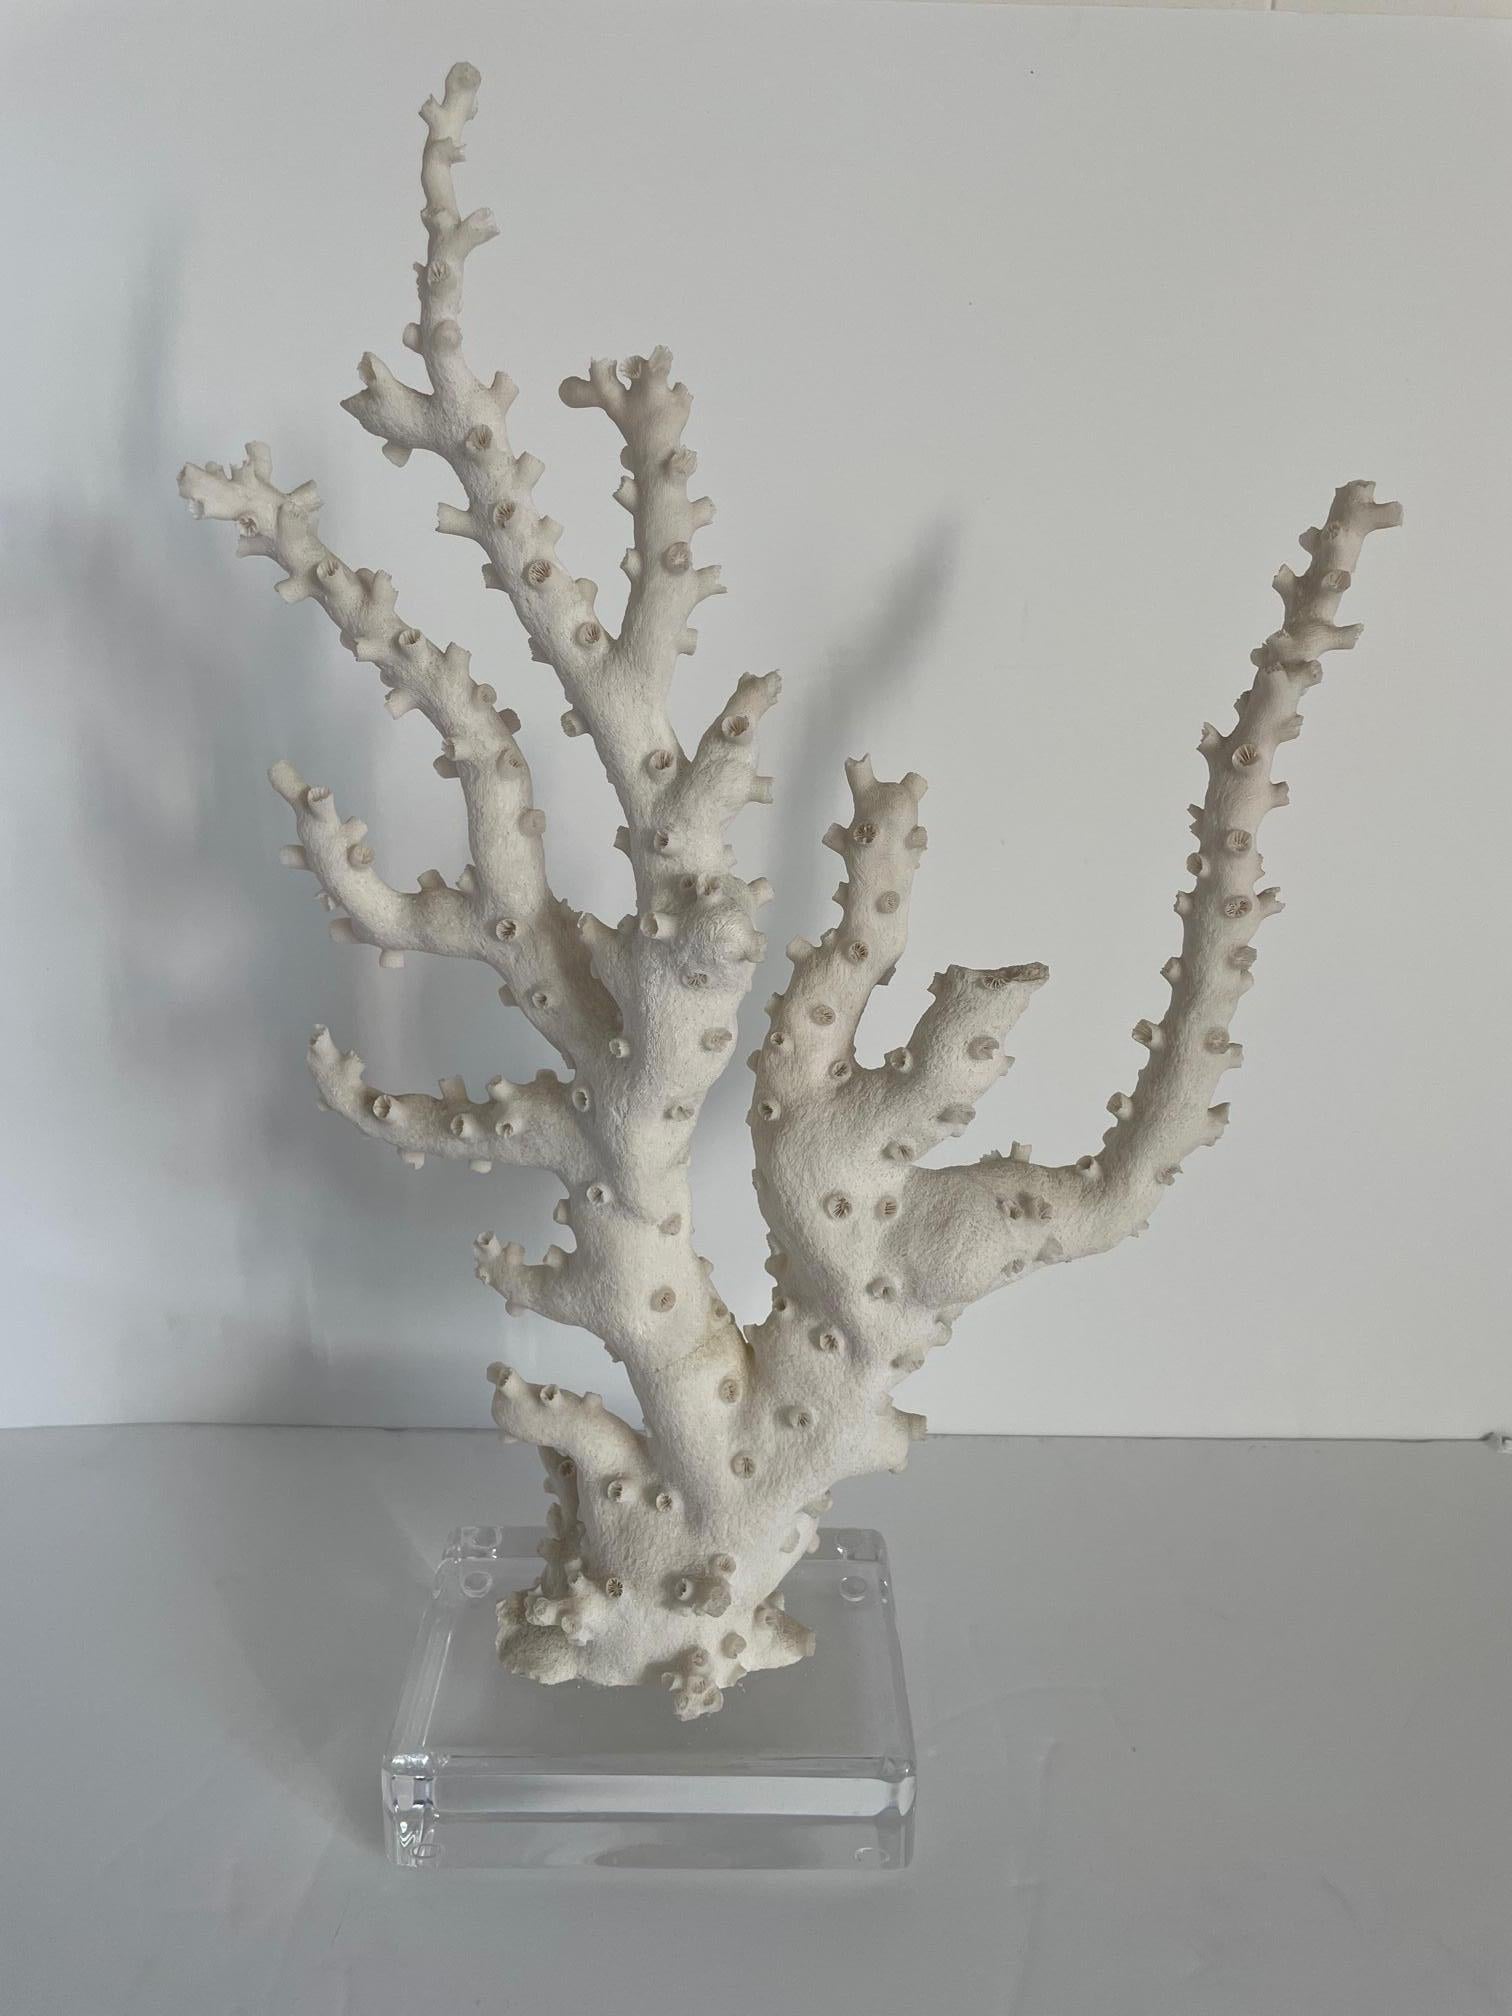 A tall sea coral sculpture mounted on a  piece of plastic. 
